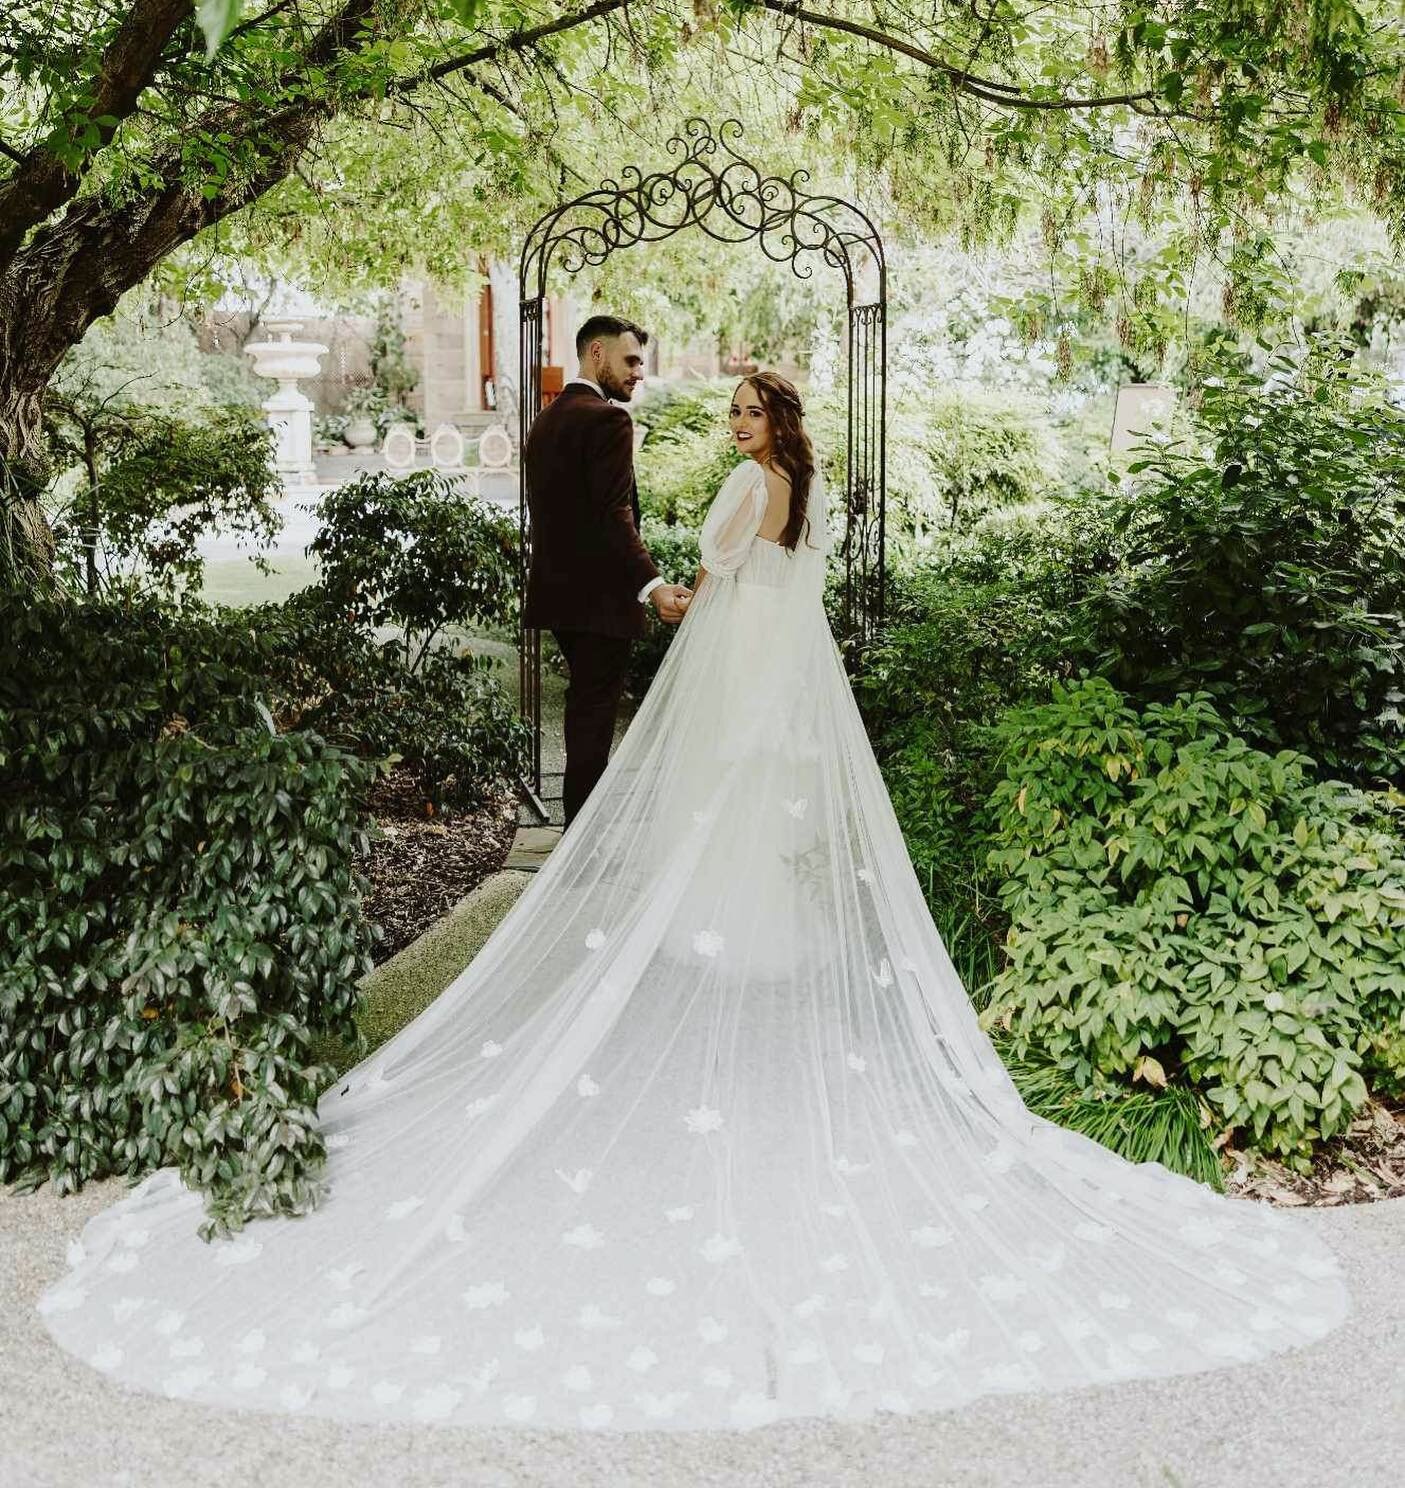 The hand embroidered train on this custom gown was a showstopper ✨

#erinnferry #bespokebridal #custombridal
#madeinmelbourne #tulleweddingdress #detachabletrain #detachablesleeves #removabletrain #embroideredtrain #embroideredveil